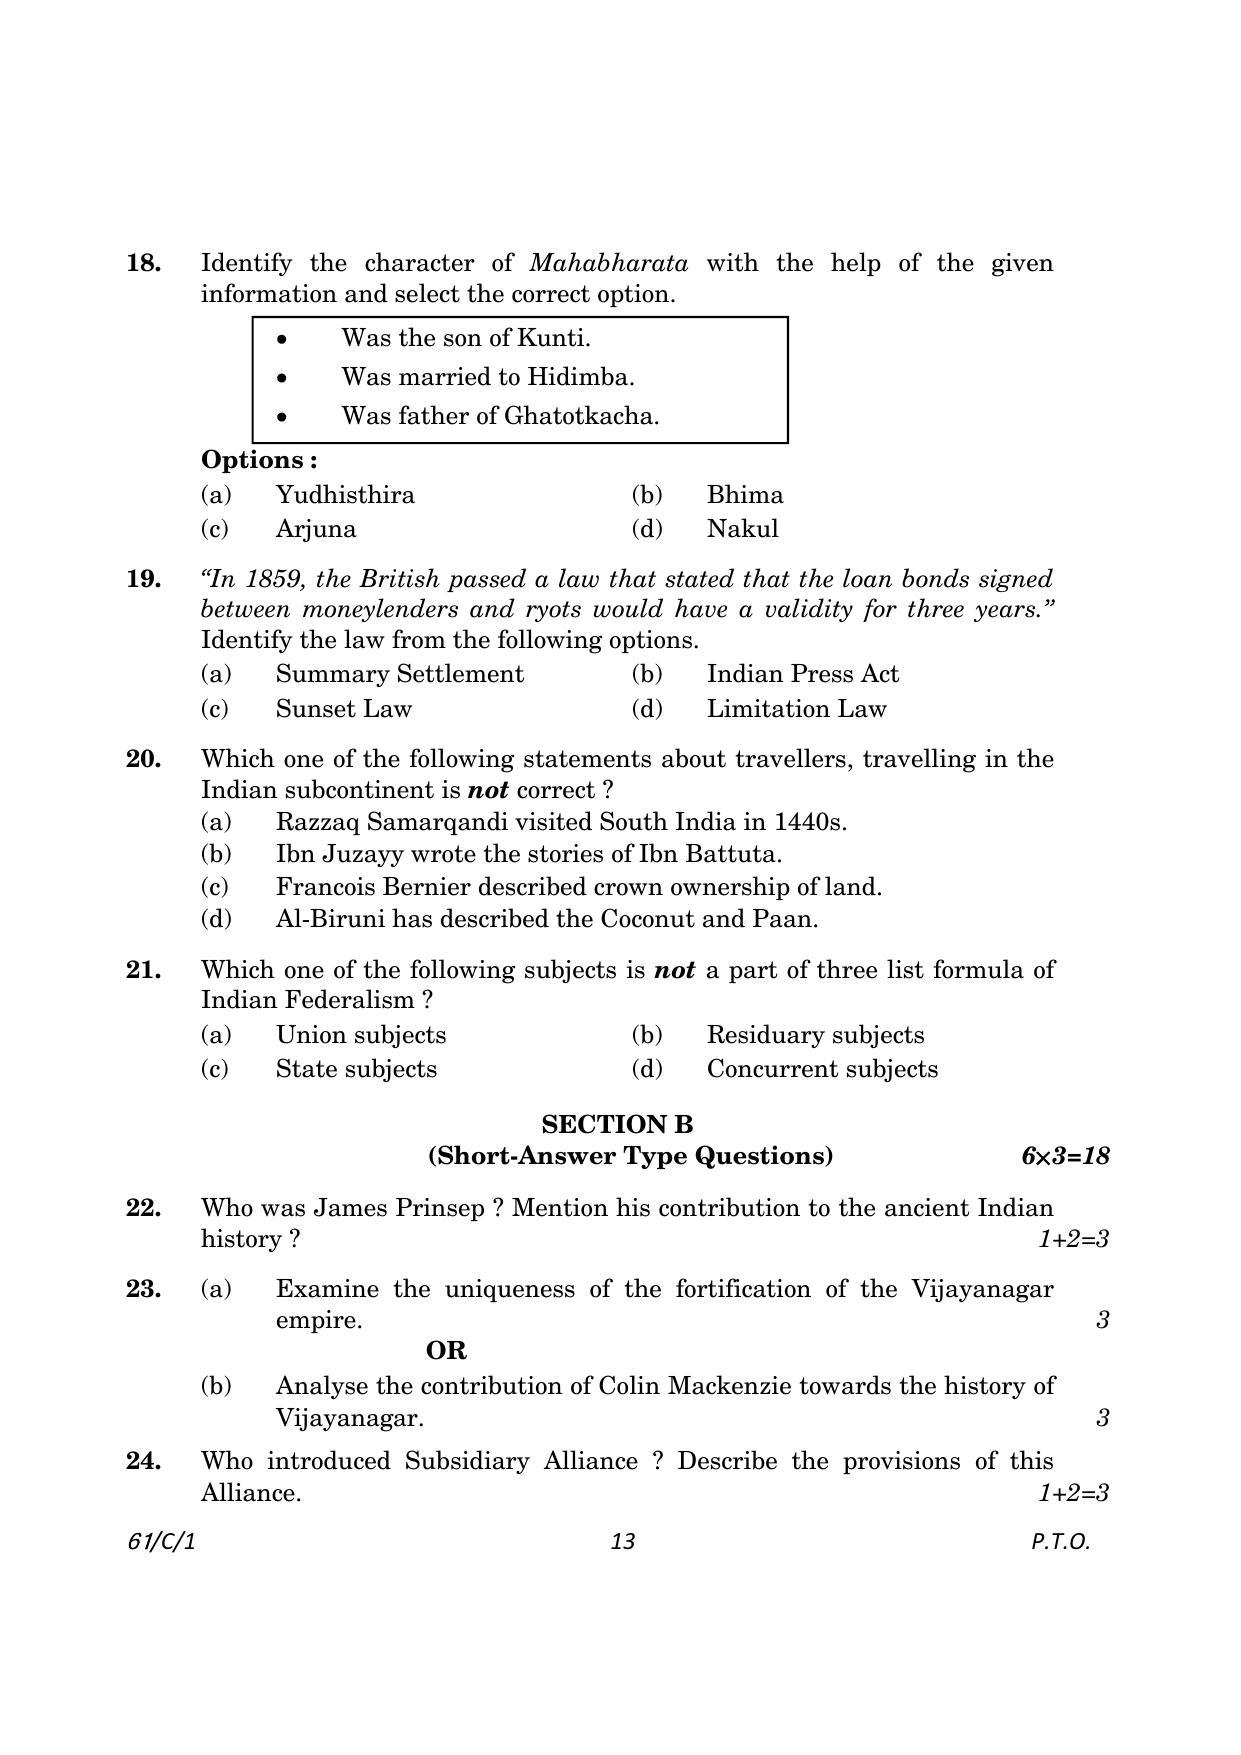 CBSE Class 12 61-1 History 2023 (Compartment) Question Paper - Page 13